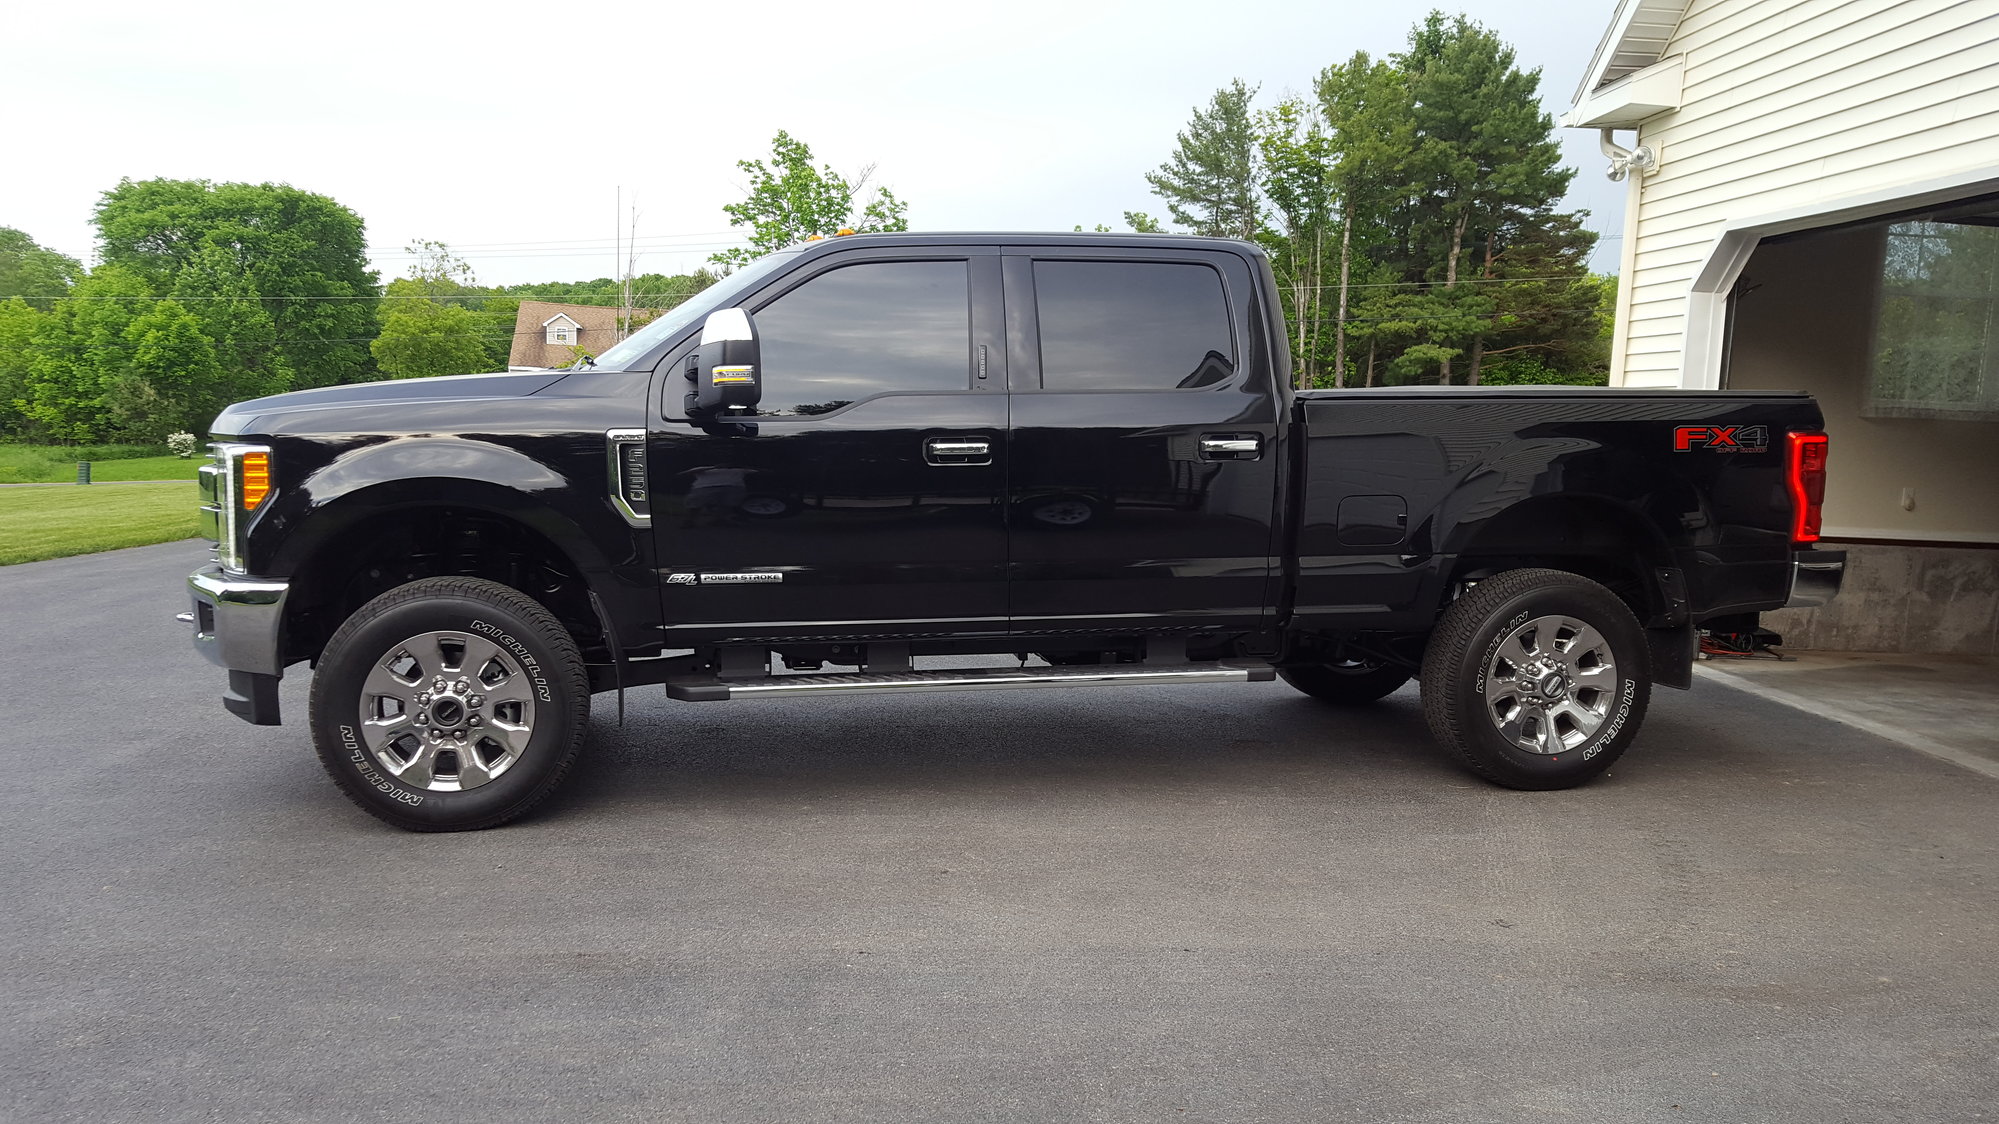 2018 f250 with new rims and 35" tires, tires seem small? 